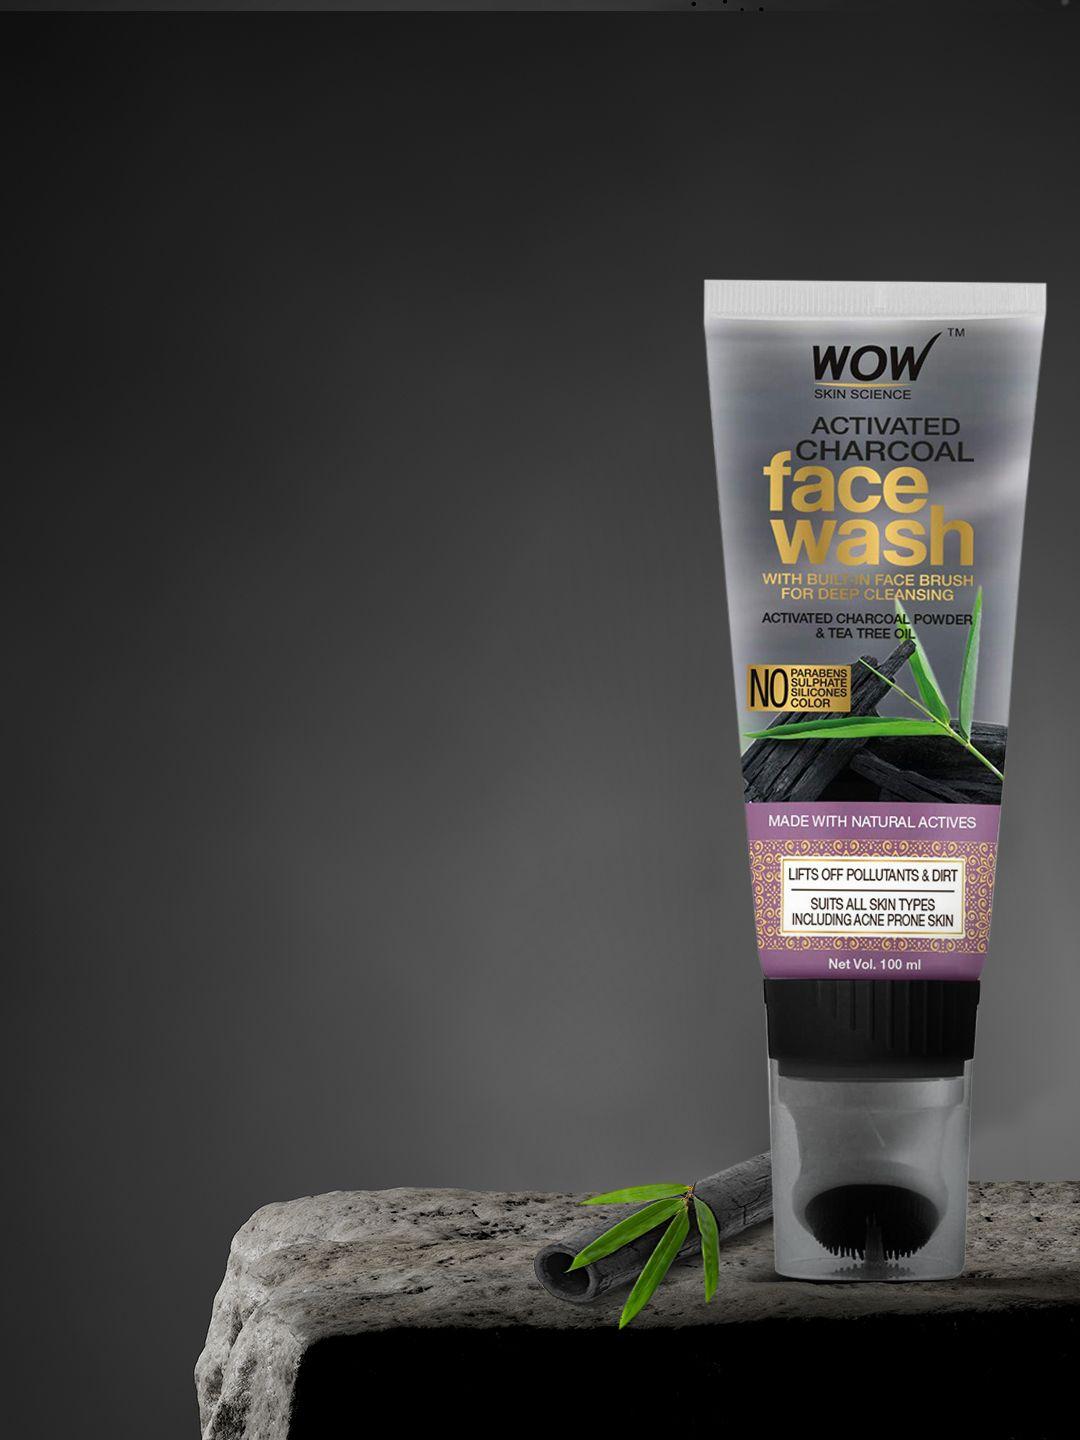 wow skin science activated charcoal face wash gel with built-in face brush 100 ml